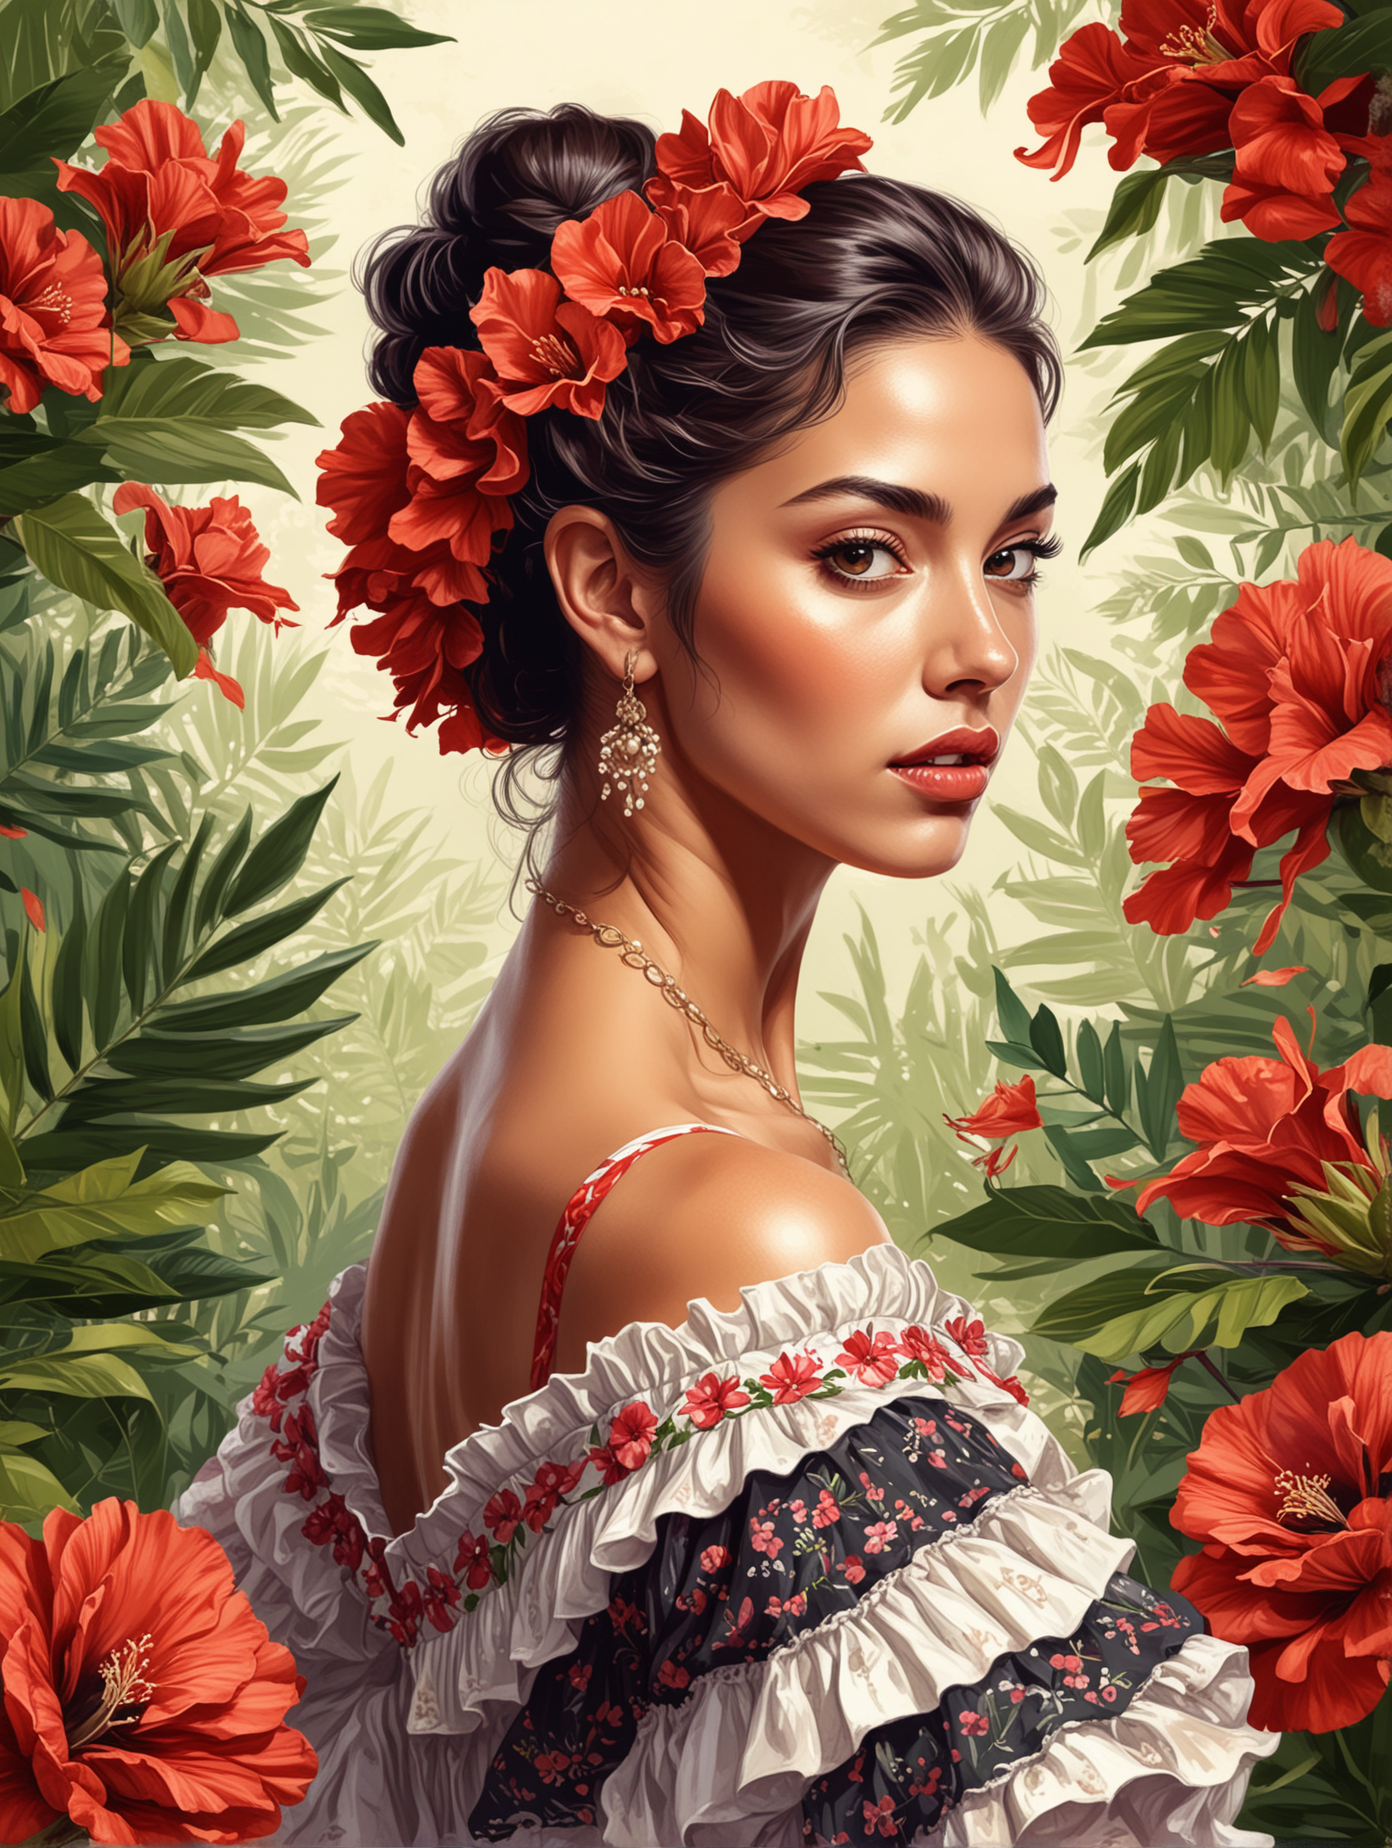 illustration of a beautiful woman flamenco dancer, she wears the traditional dress, flowers and plants in the background, portrait 